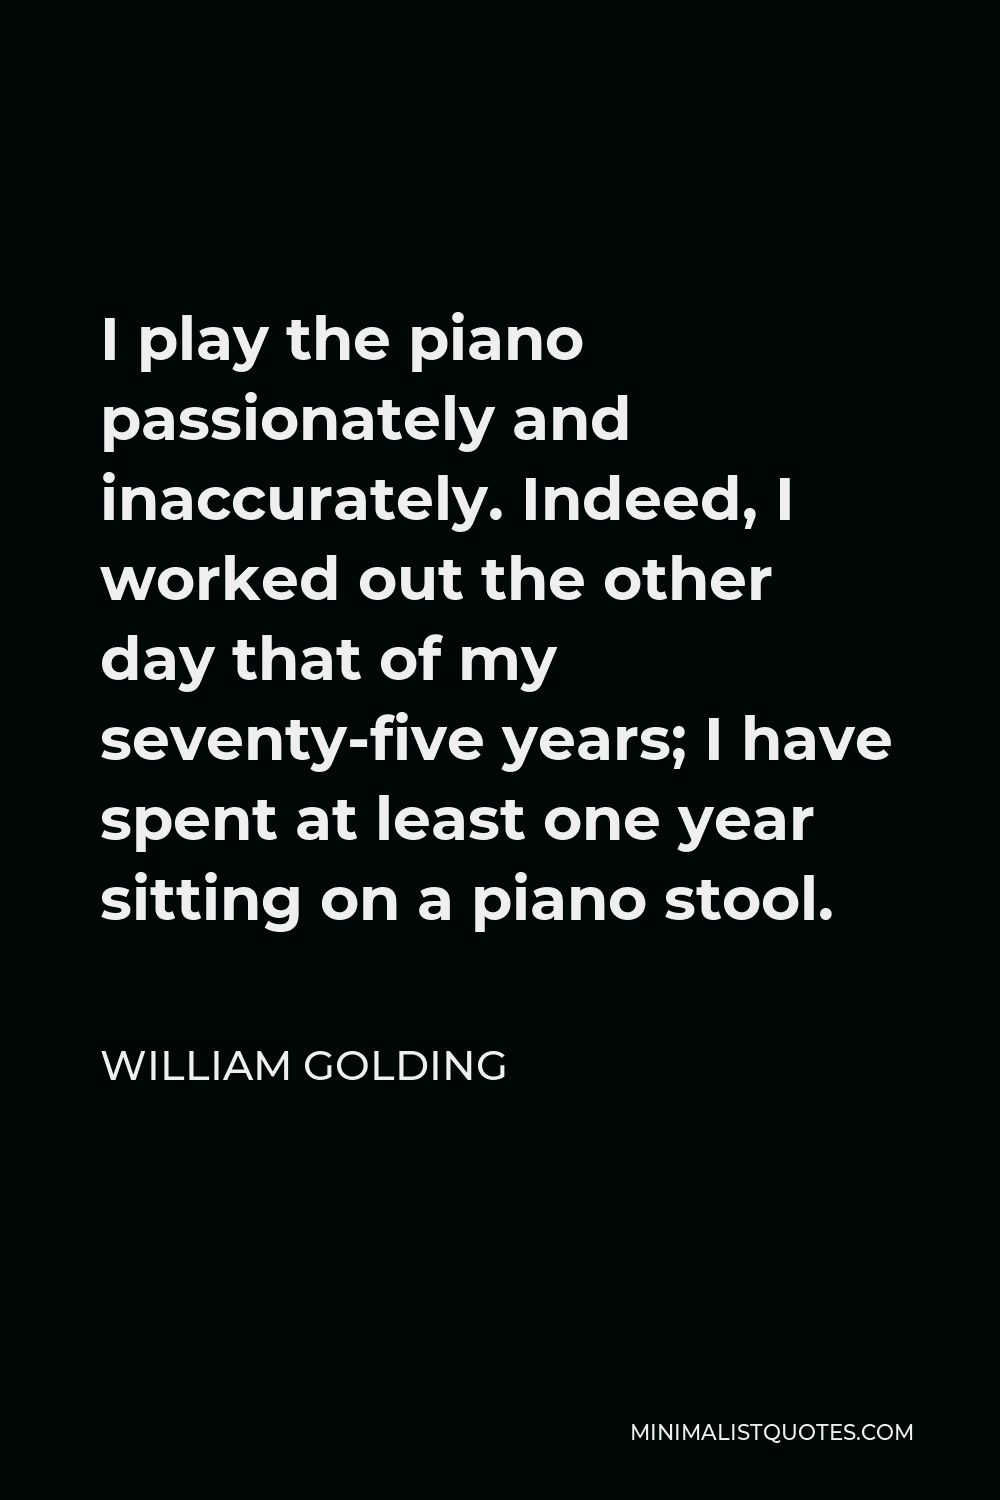 William Golding Quote - I play the piano passionately and inaccurately. Indeed, I worked out the other day that of my seventy-five years; I have spent at least one year sitting on a piano stool.